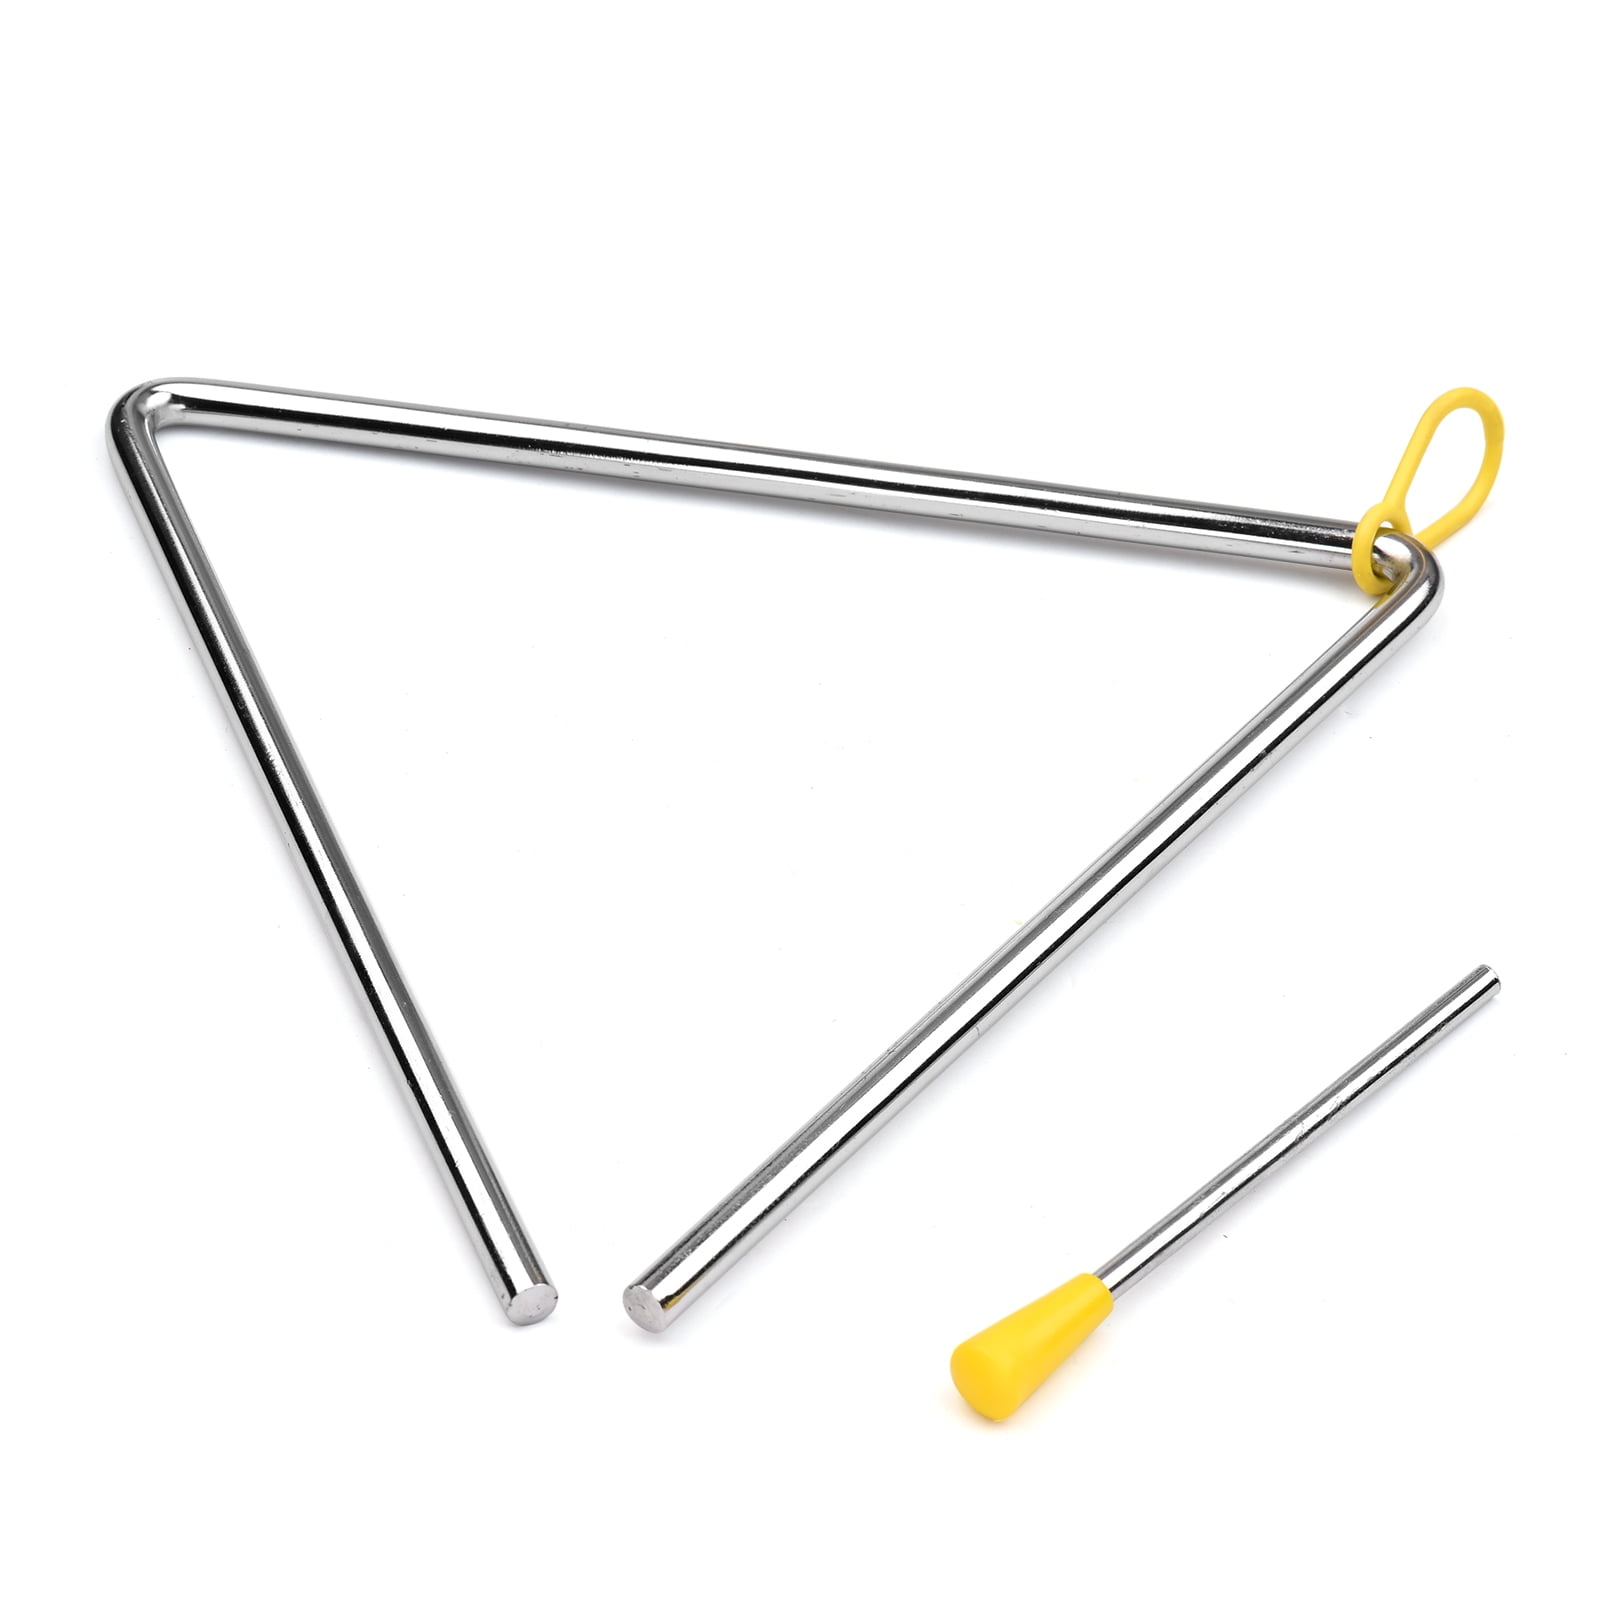 8 Inch Triangle Bell Triangolo with Metal Mallet Idiophone Steel